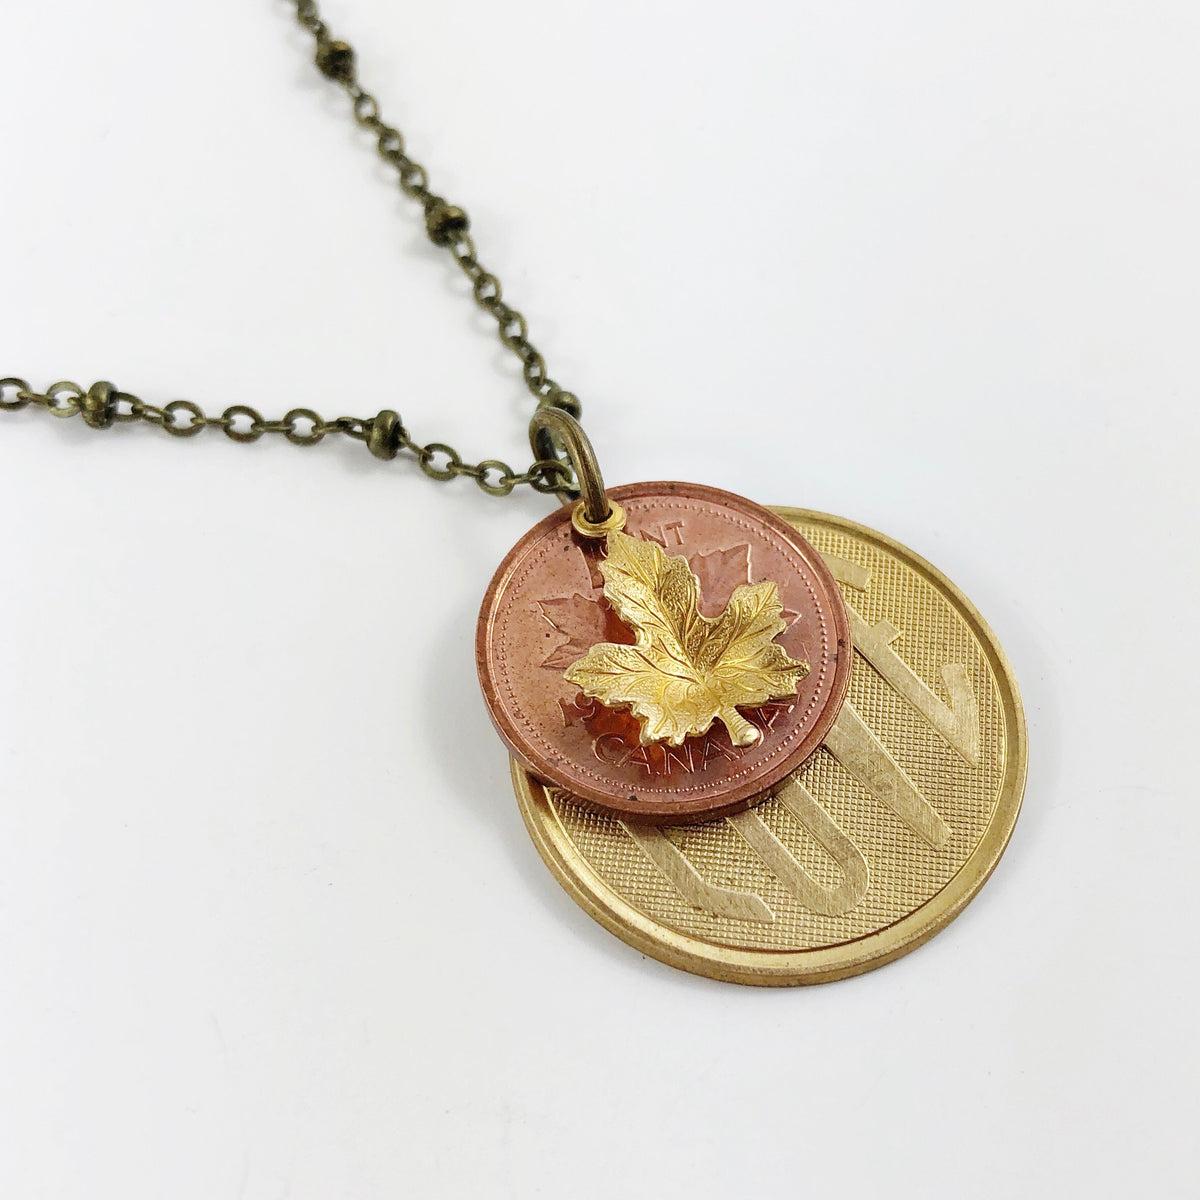 &quot;Penny Love&quot; Necklace - Choose your Penny year!